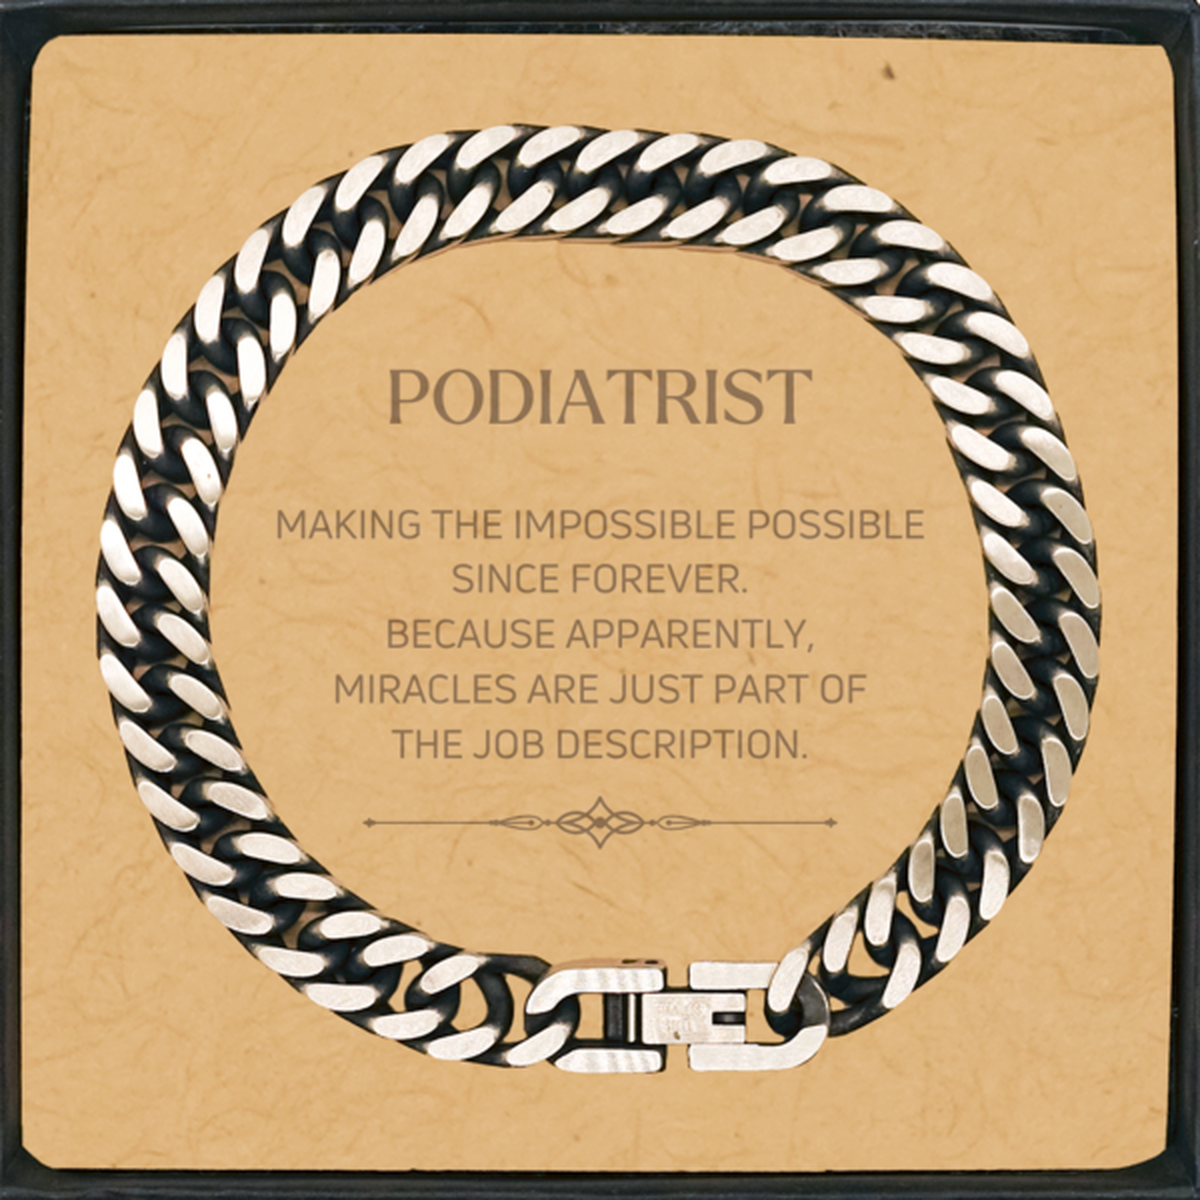 Funny Podiatrist Gifts, Miracles are just part of the job description, Inspirational Birthday Cuban Link Chain Bracelet For Podiatrist, Men, Women, Coworkers, Friends, Boss